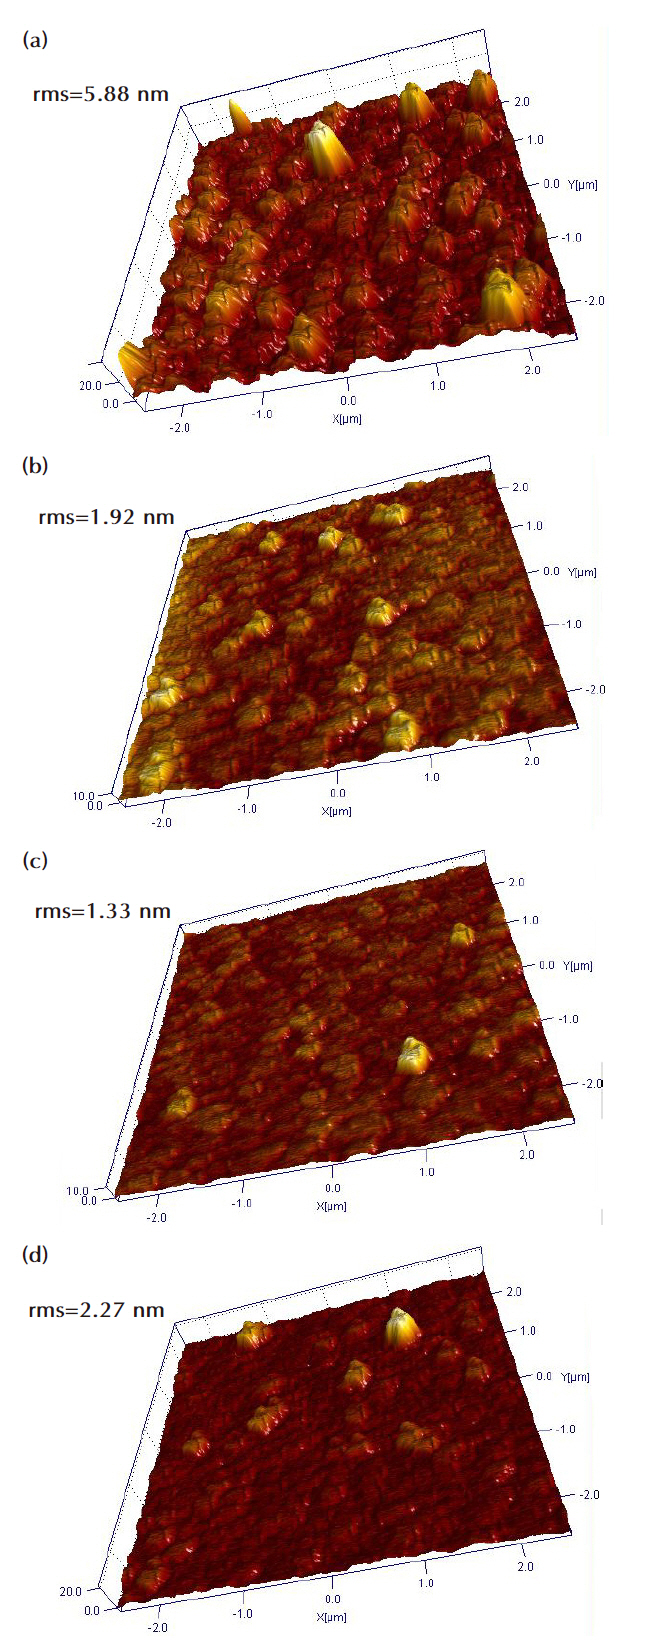 Atomic force microscopy images for zinc oxide thin films (a) as-deposited (b) etched in Cl2/Ar plasma (c) etched in Cl2/N2 plasmaand (d) etched in Cl2/He plasma. RMS: root mean square.